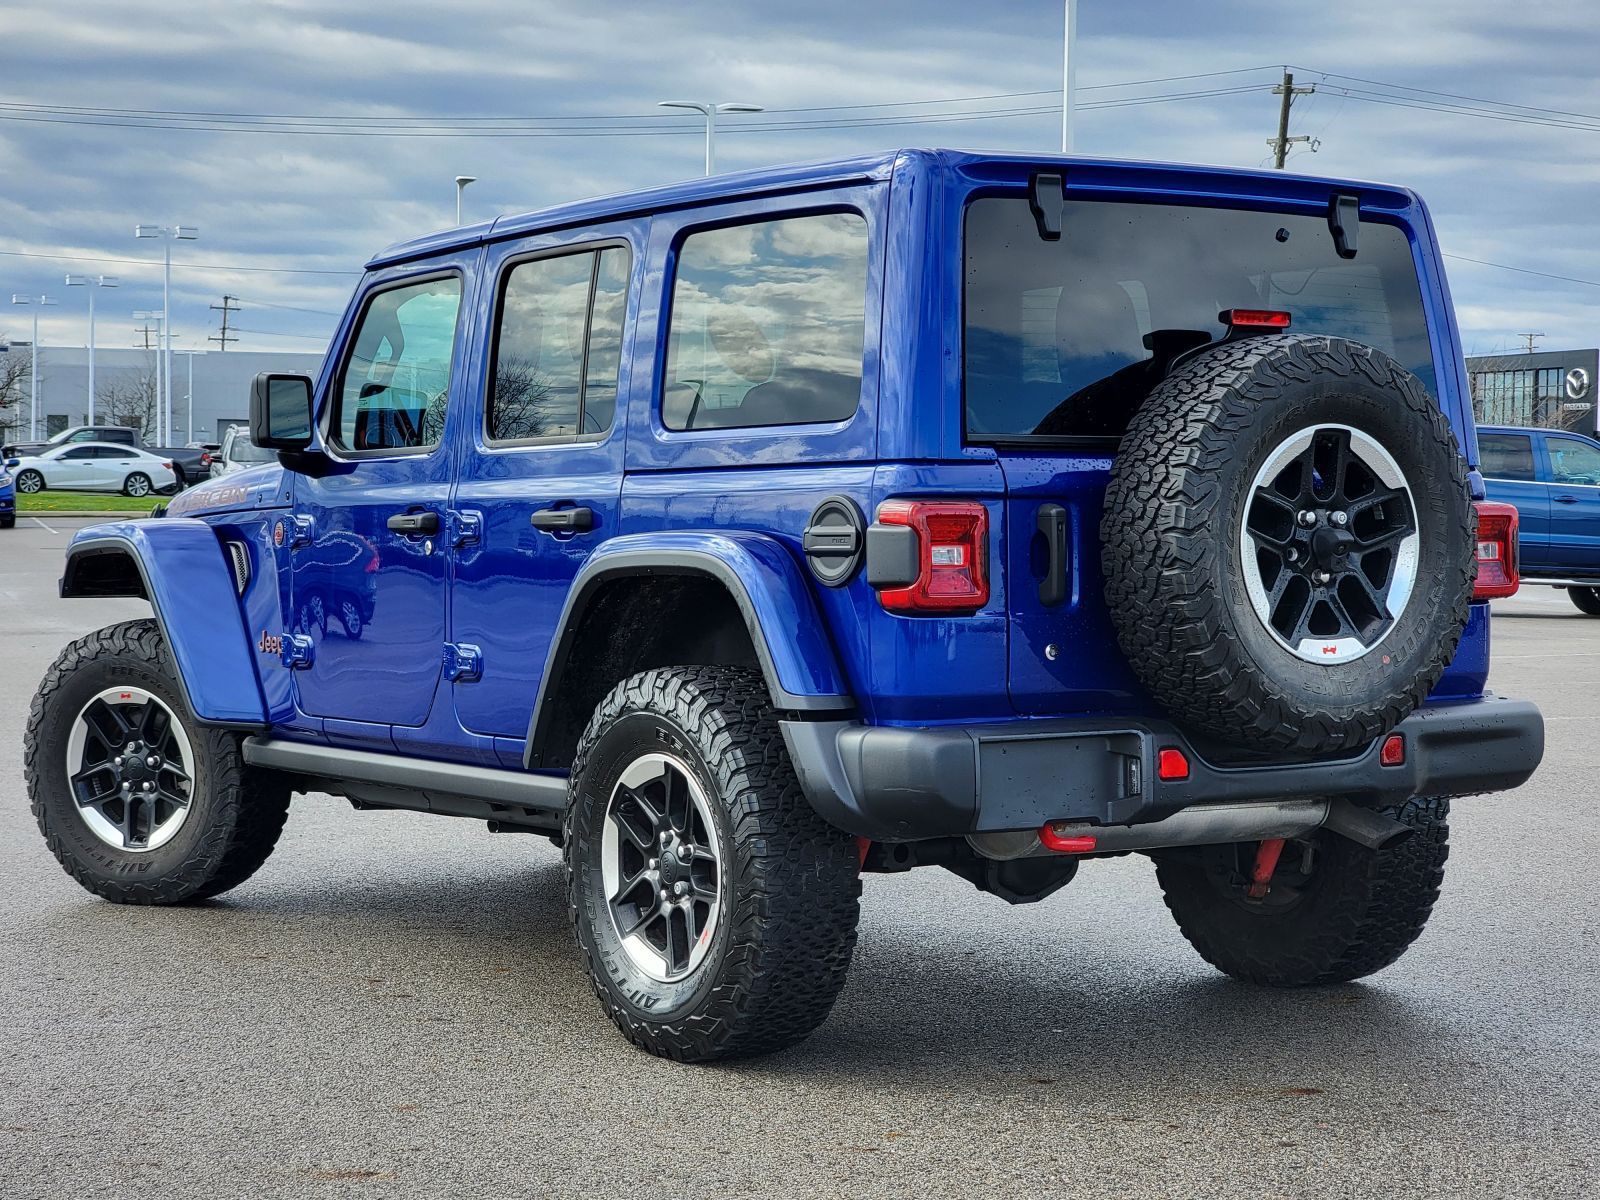 Used, 2019 Jeep Wrangler Unlimited Unlimited Rubicon, Blue, P0529-11